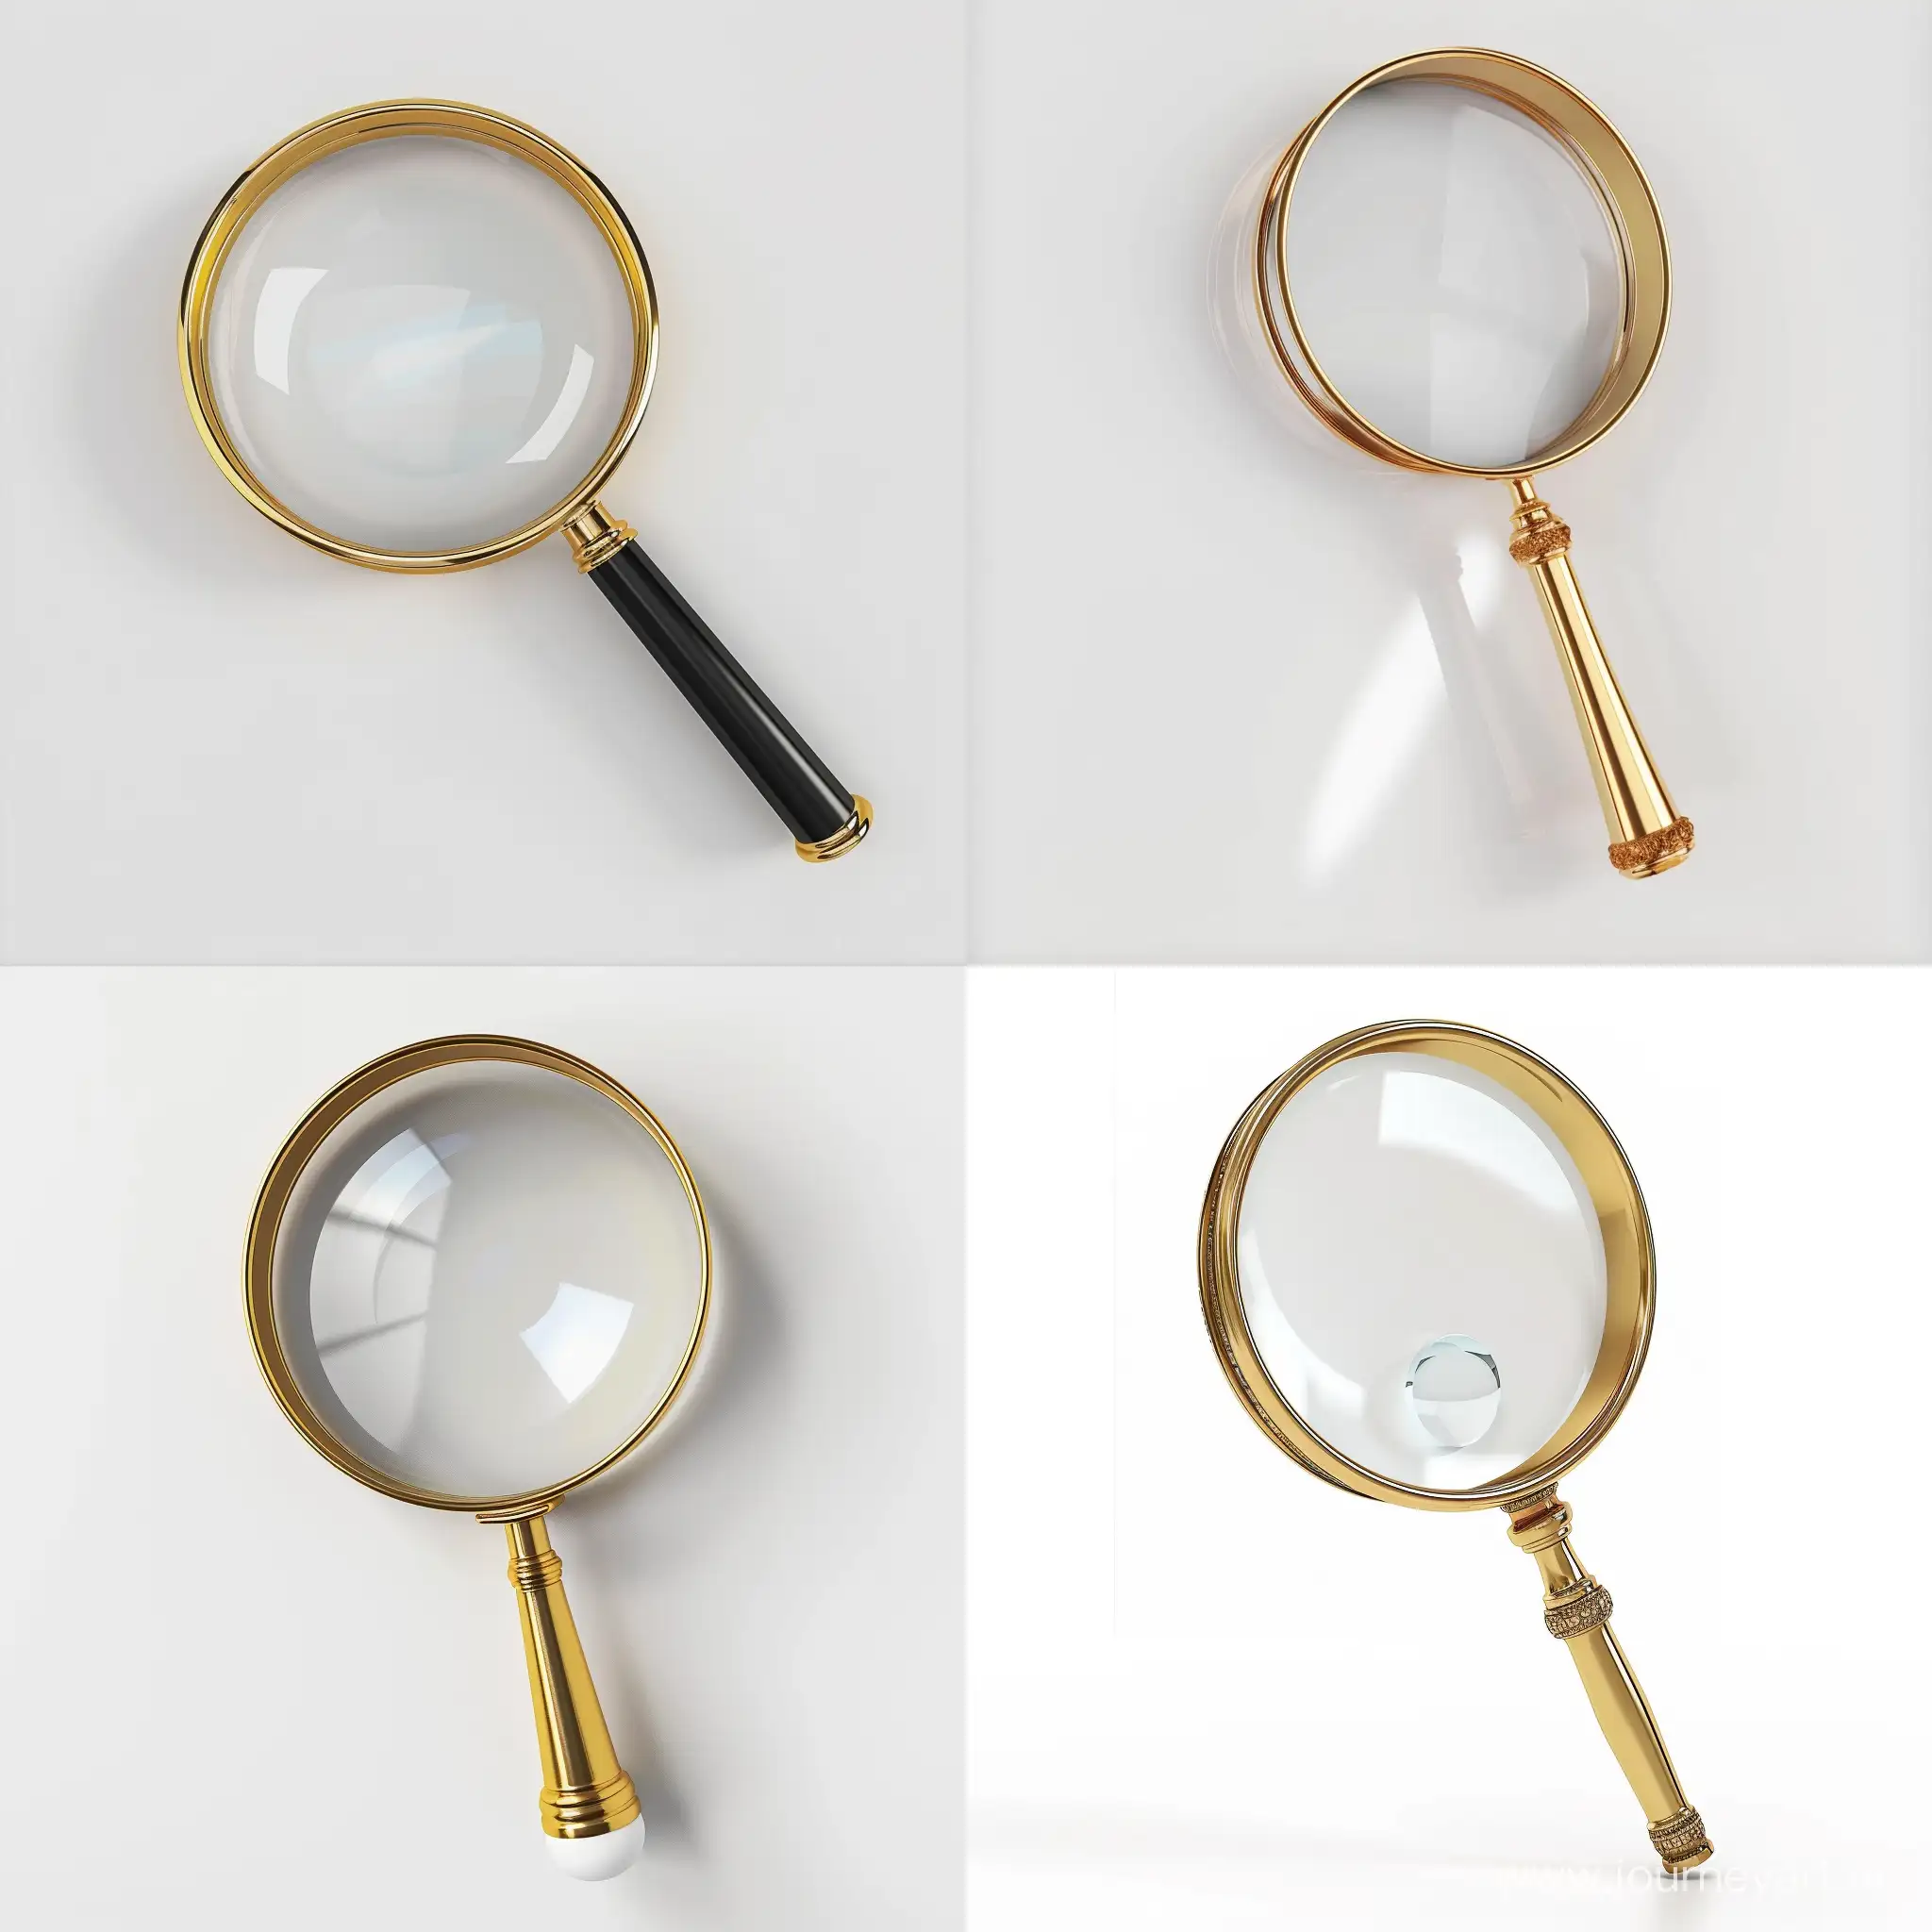 Magnifying-Glass-3D-Render-on-White-Background